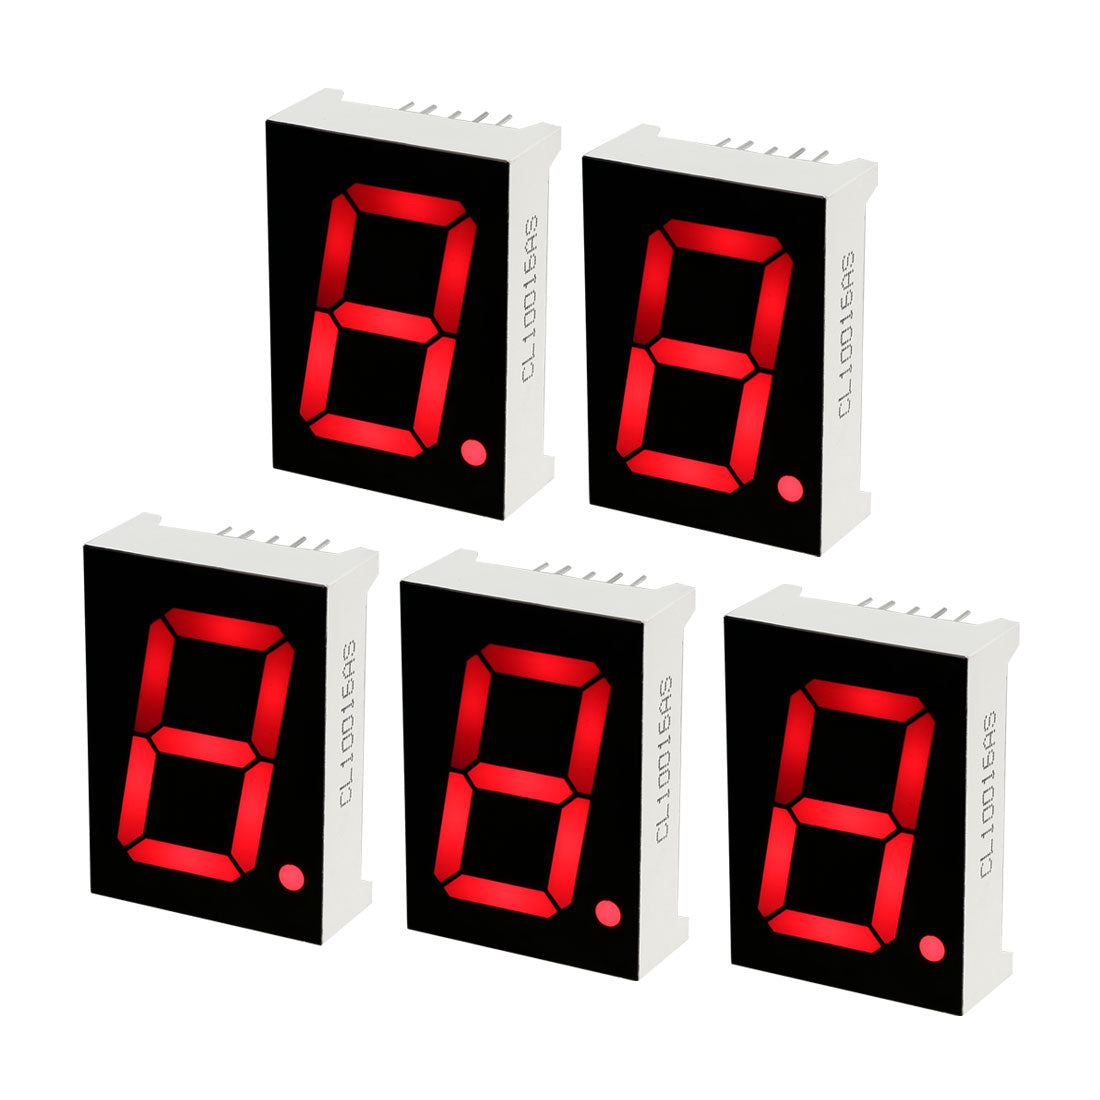 uxcell Uxcell Common Cathode 10 Pin 1 Bit 7 Segment 1.34 x 0.94 x 0.41 Inch 1" Red LED Display Digital Tube 5pcs